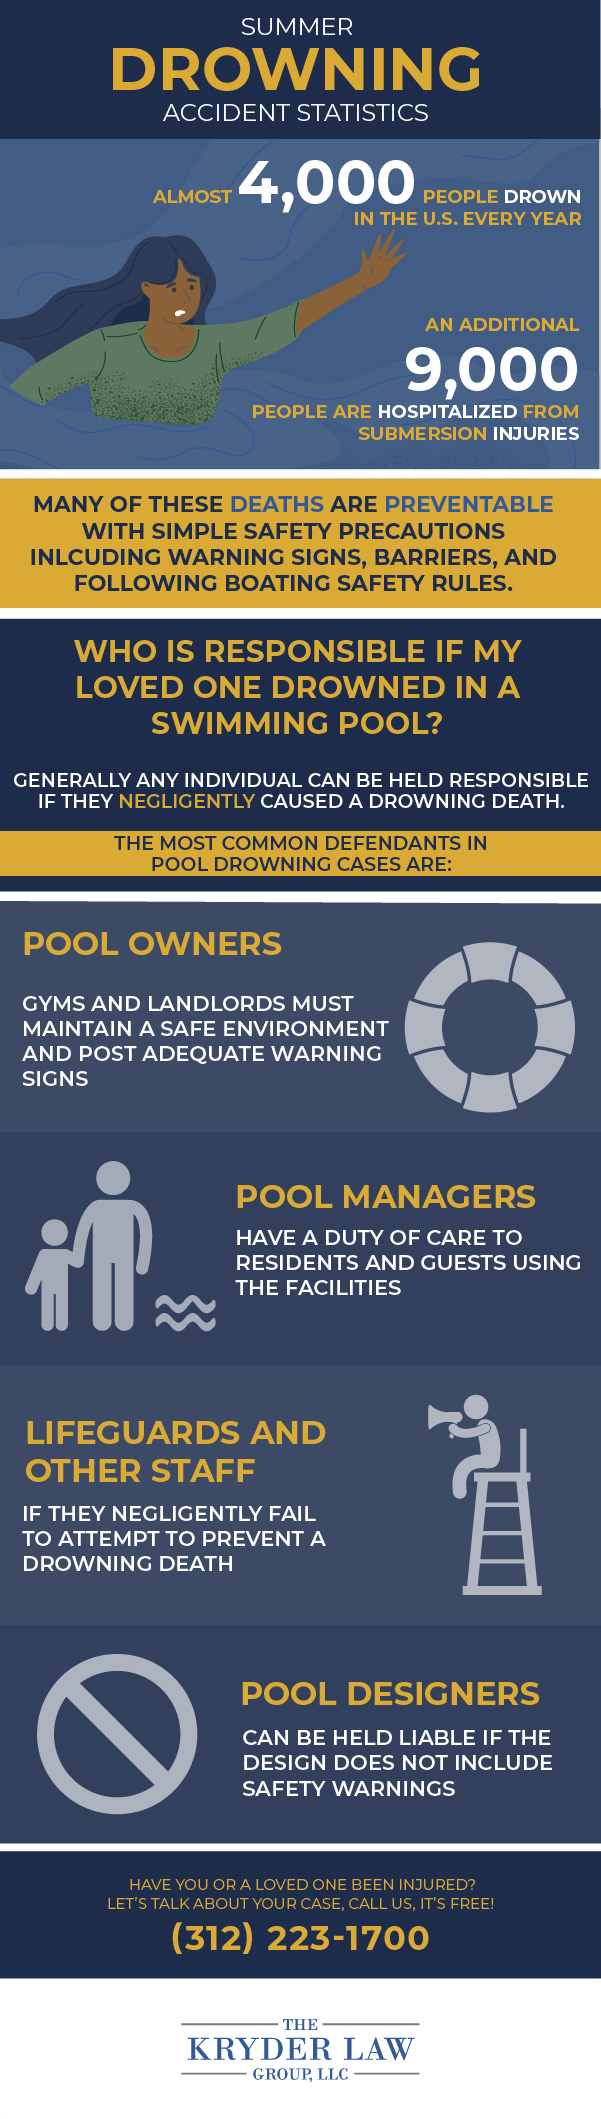 Summertime Drowning Accidents Infographic